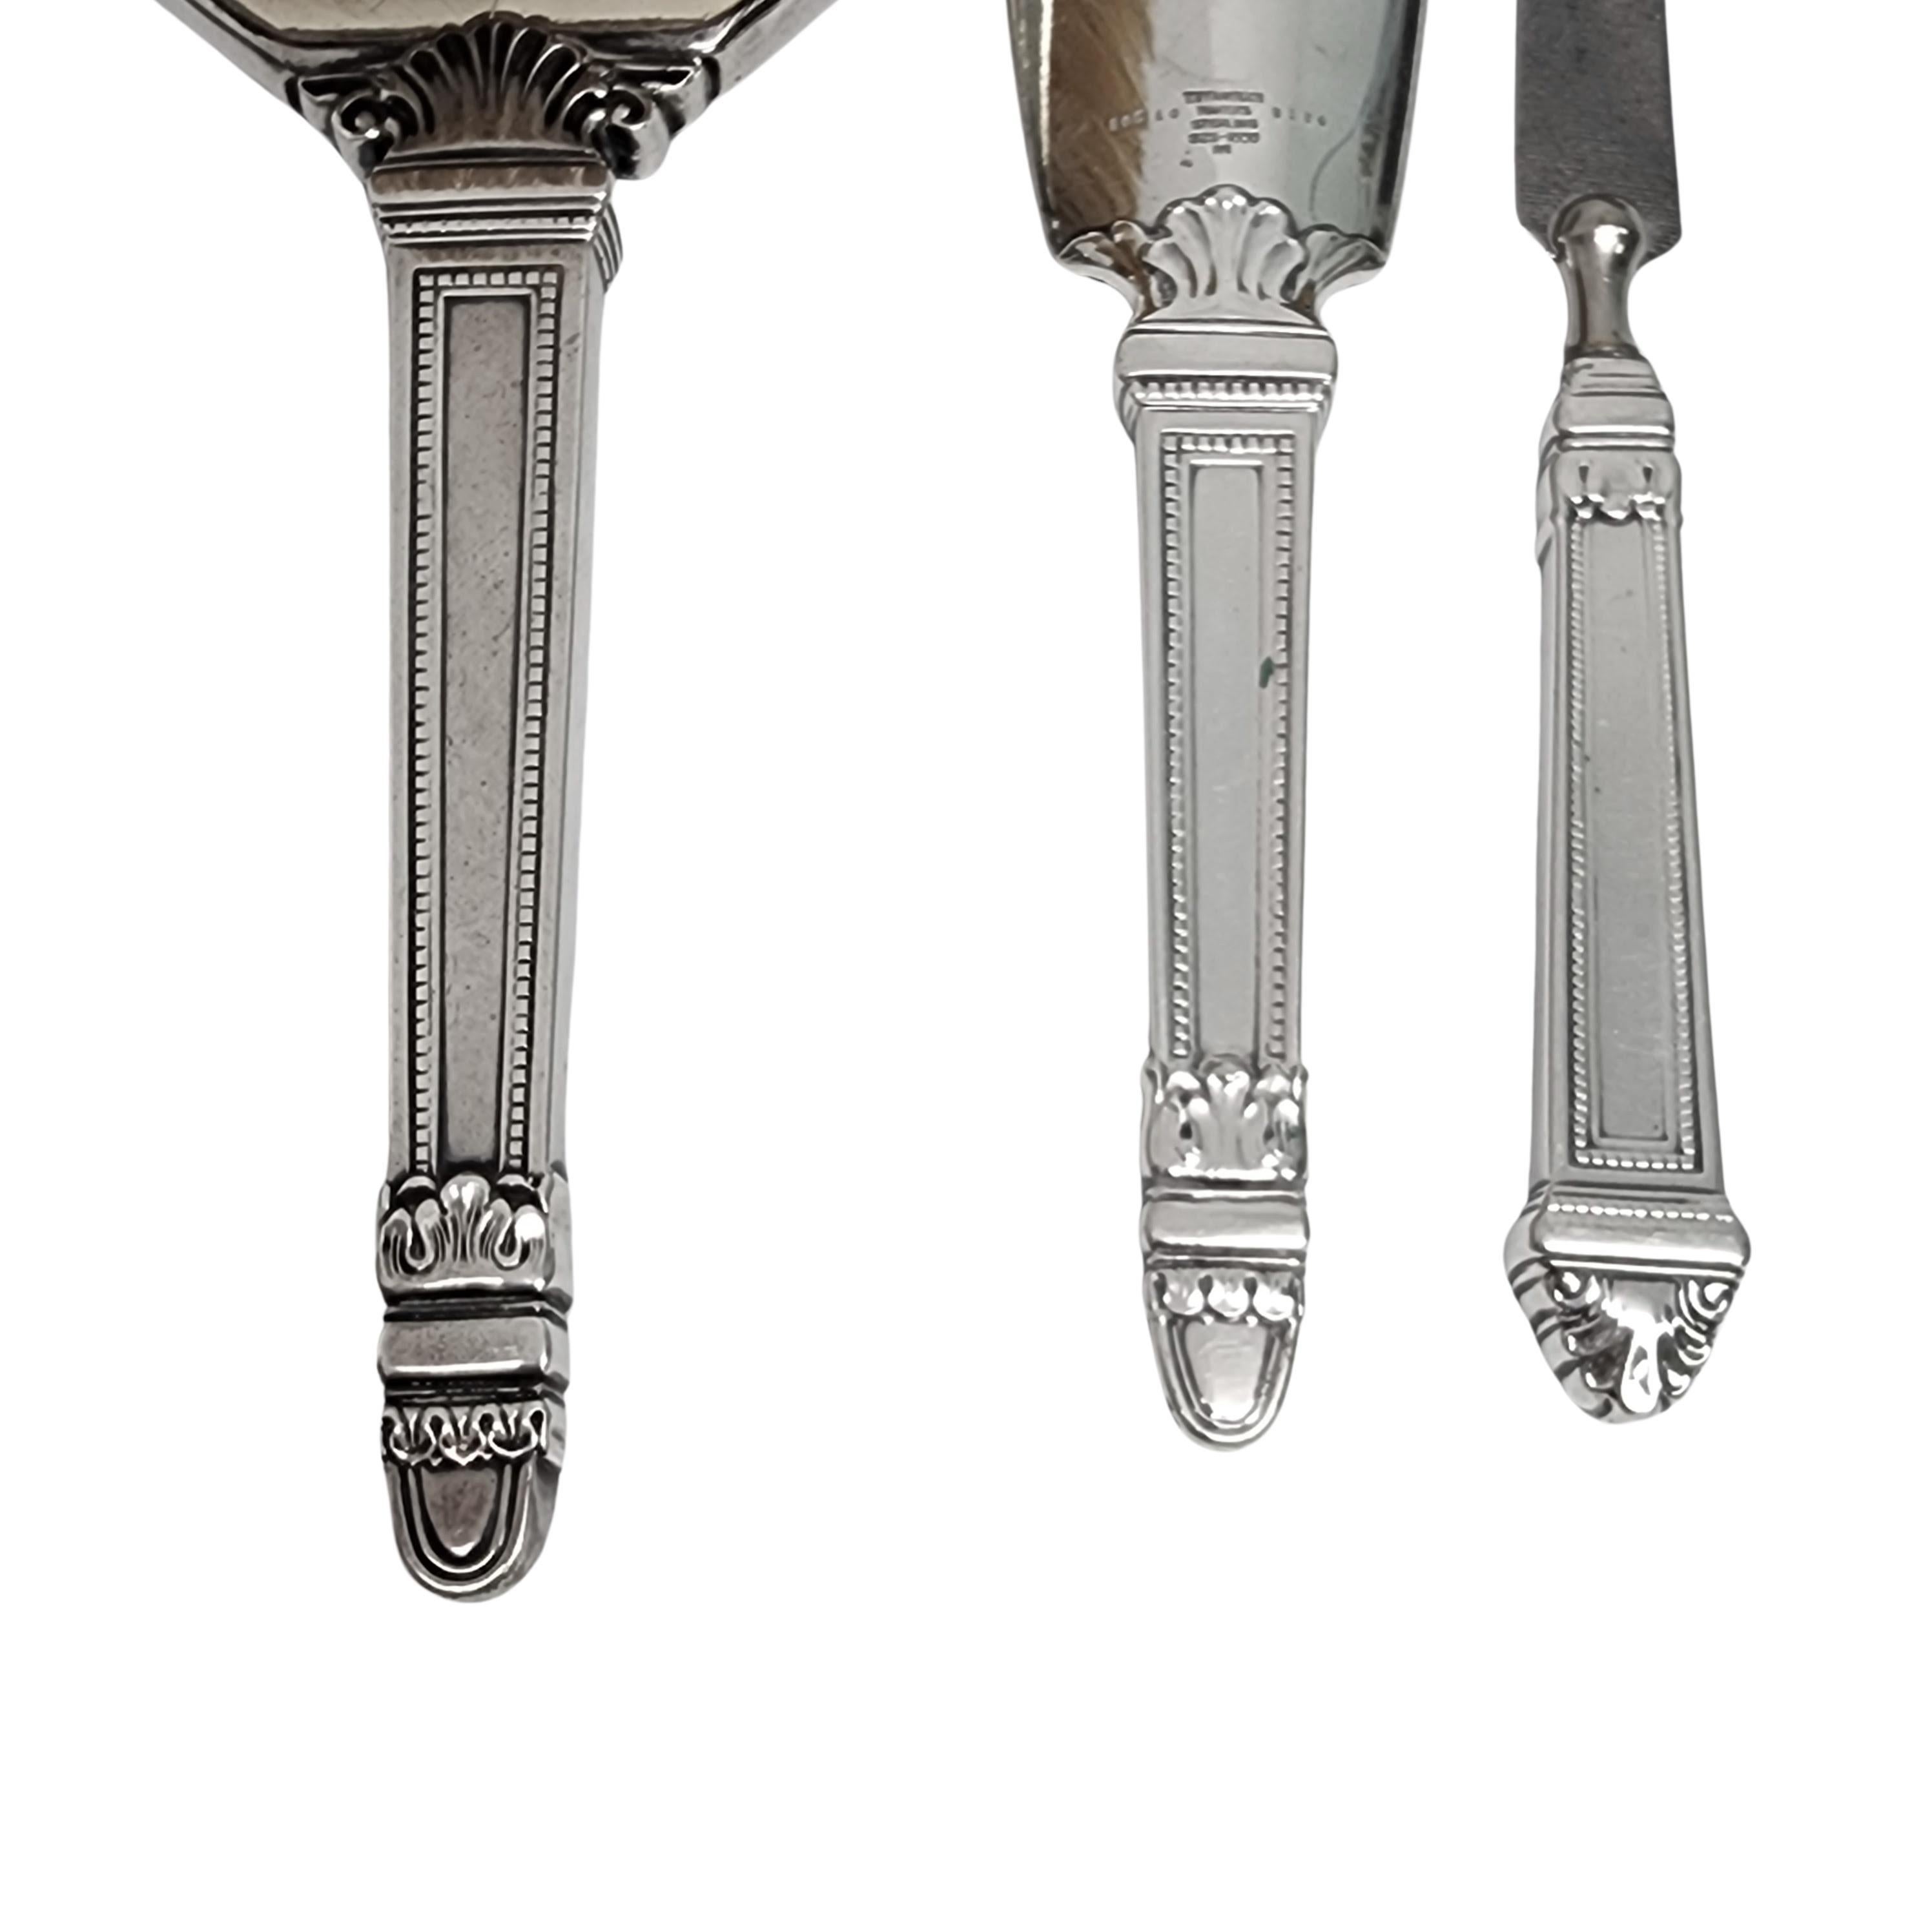 Tiffany & Co Sterling Silver 4pc Vanity Set Brushes Shoe Horn File w/Mono #16109 For Sale 4